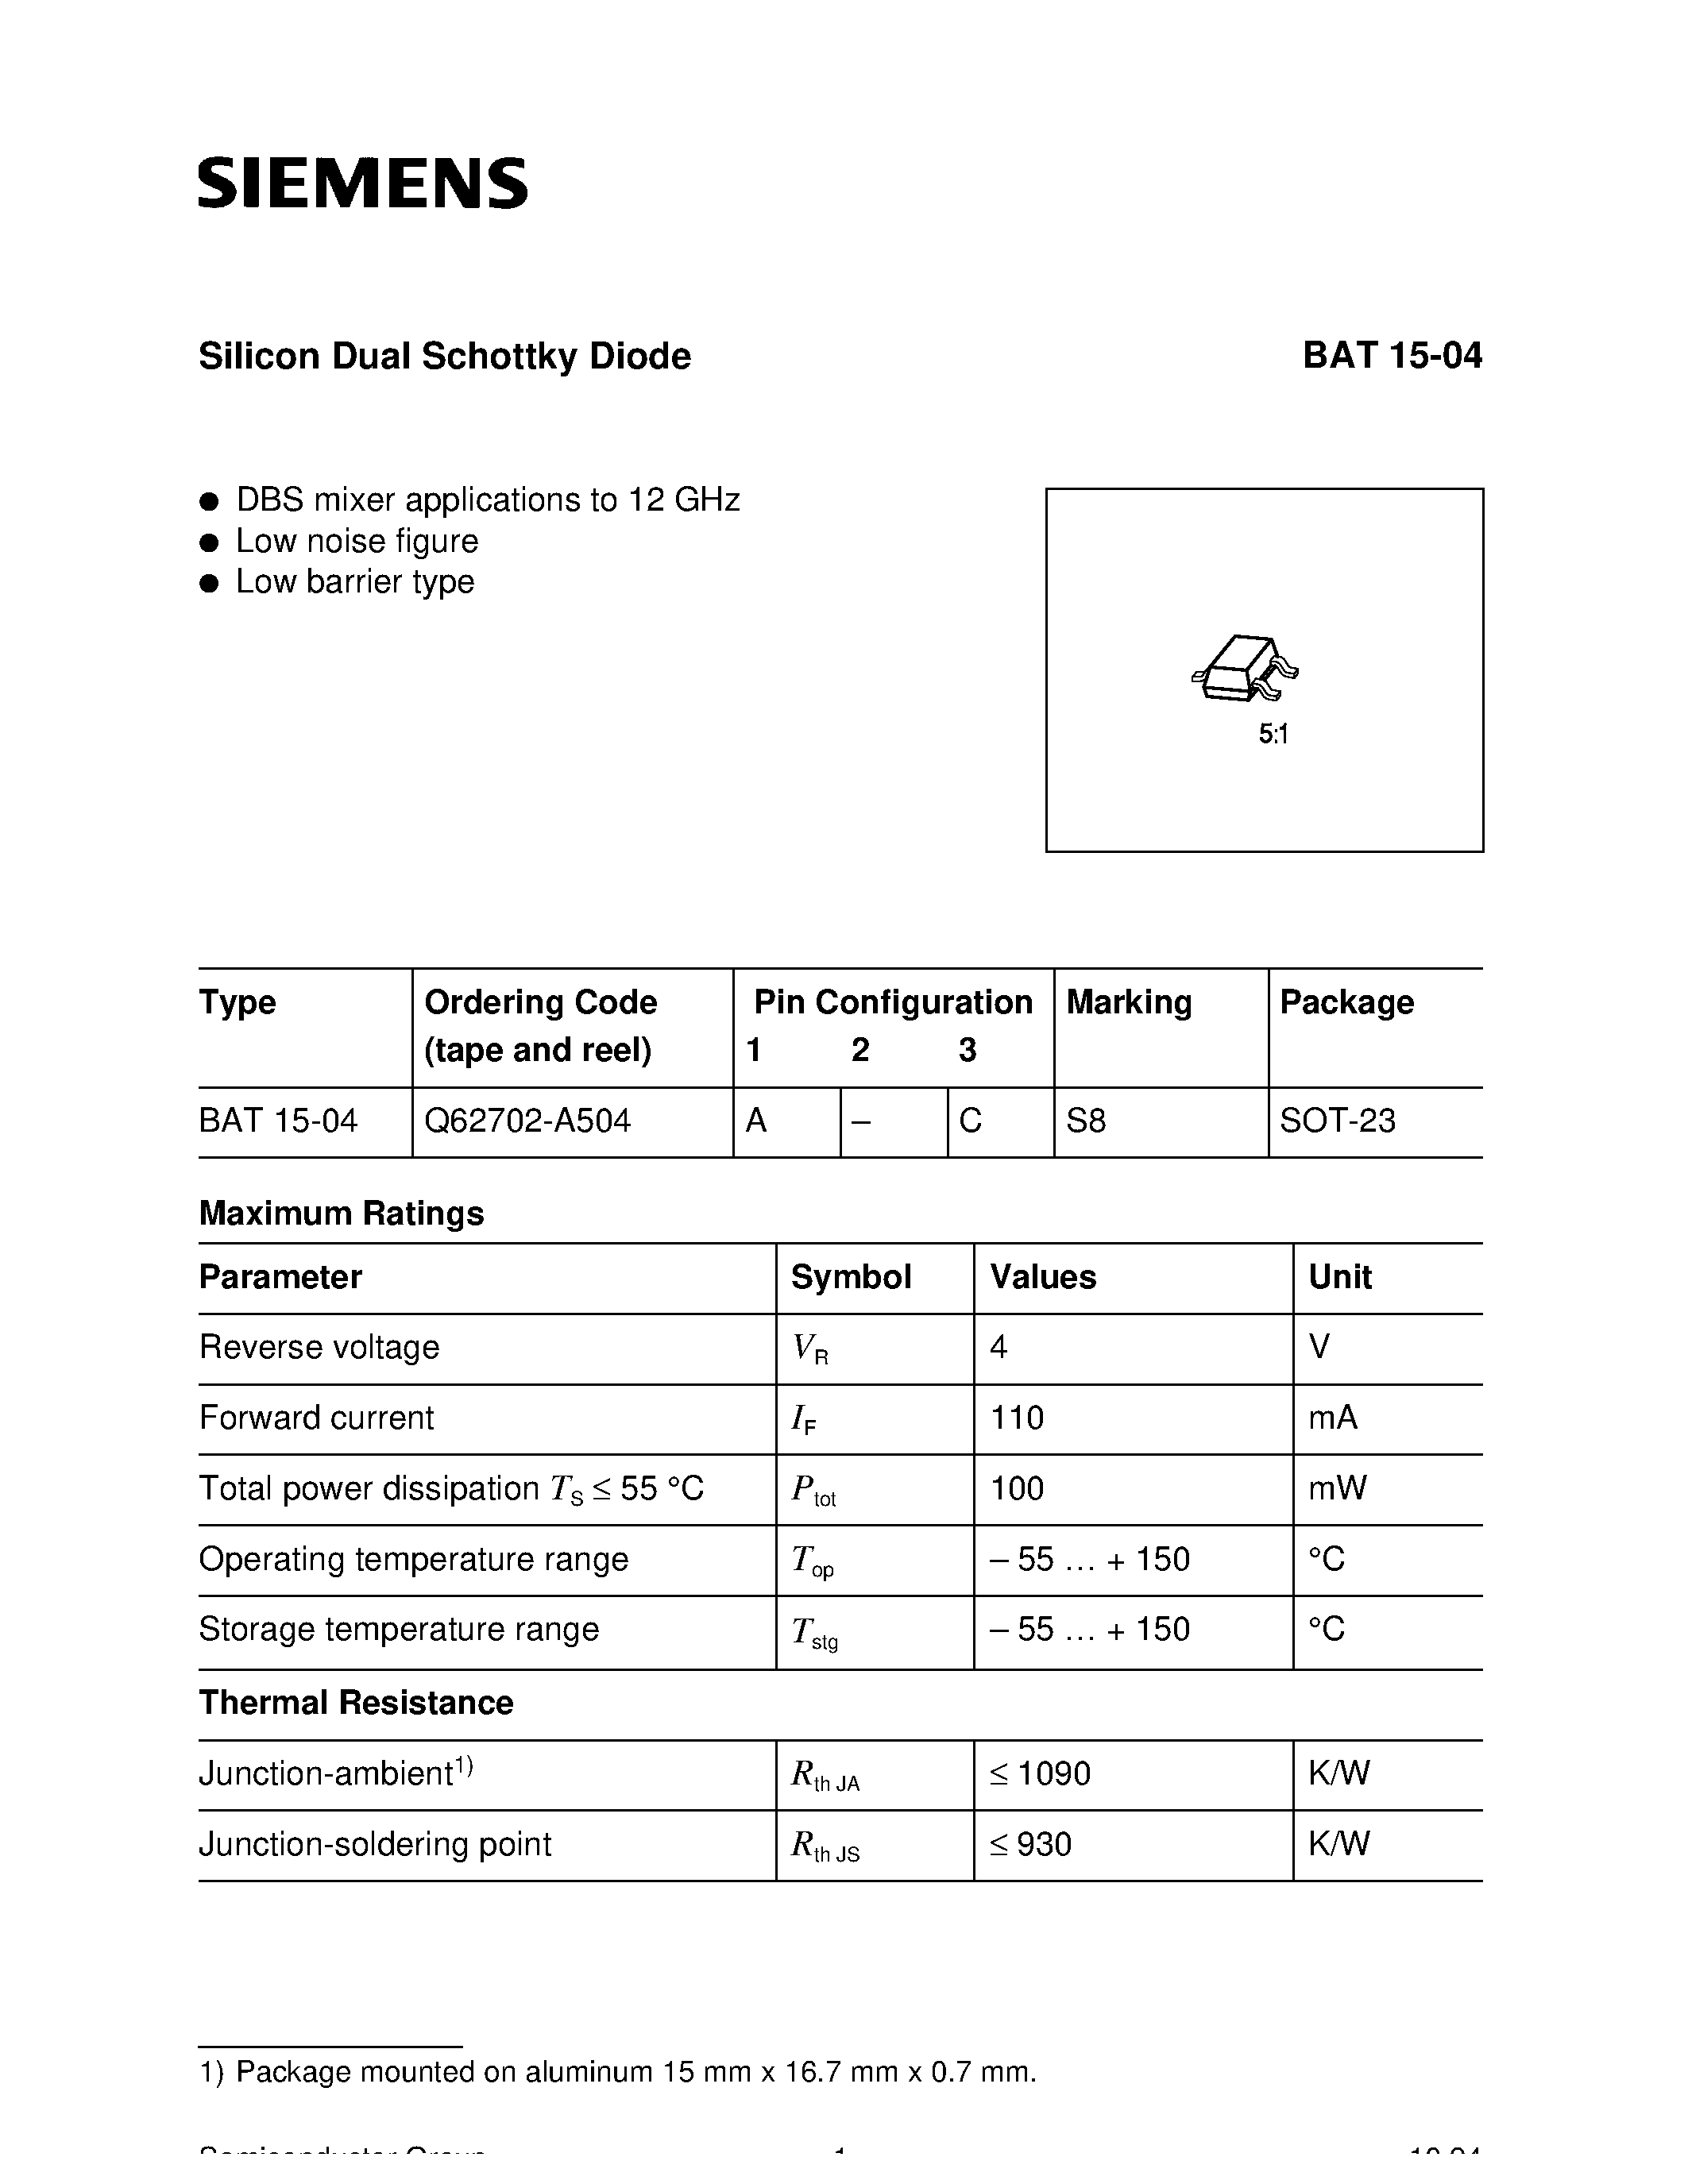 Datasheet BAT15-04 - Silicon Dual Schottky Diode (DBS mixer applications to 12 GHz Low noise figure Low barrier type) page 1